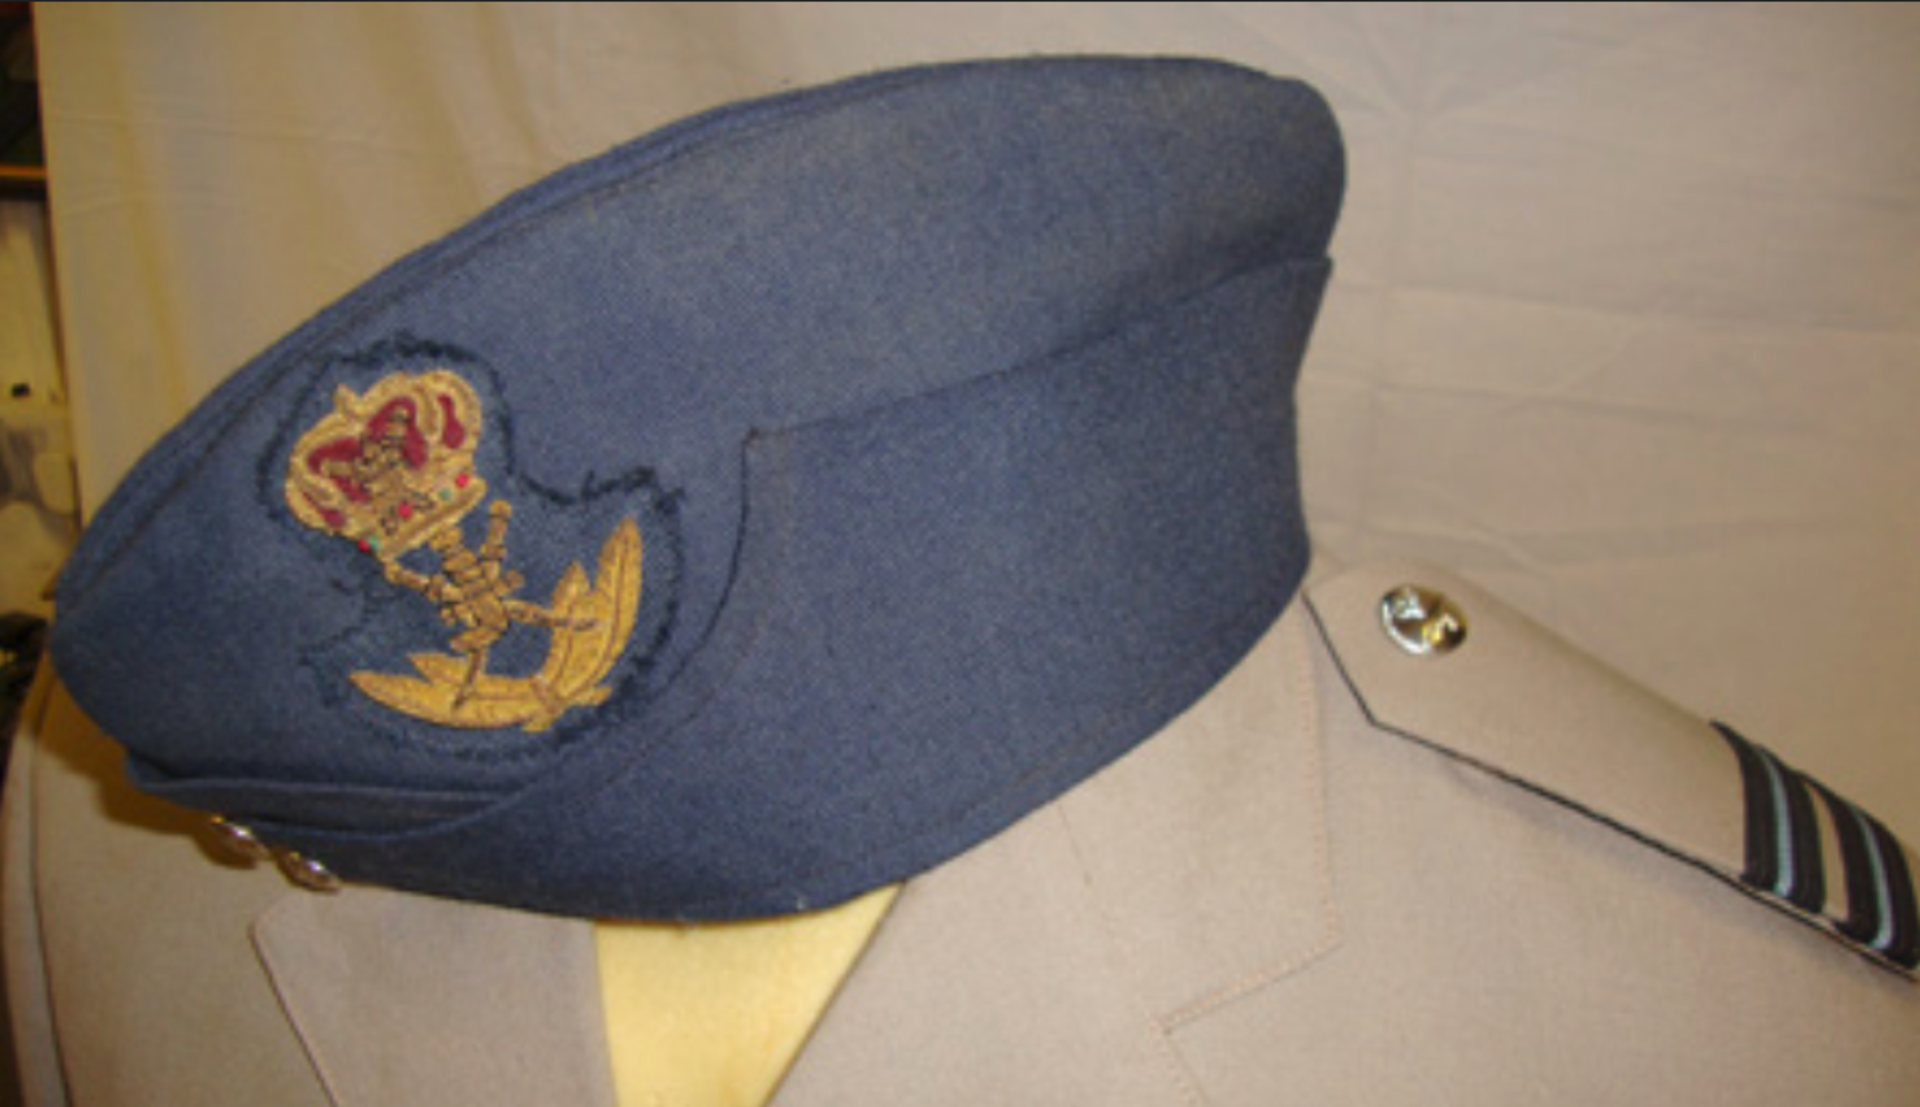 Cold War RAF Officer in Sultan of Oman Air Force Uniform & cap - Image 3 of 3